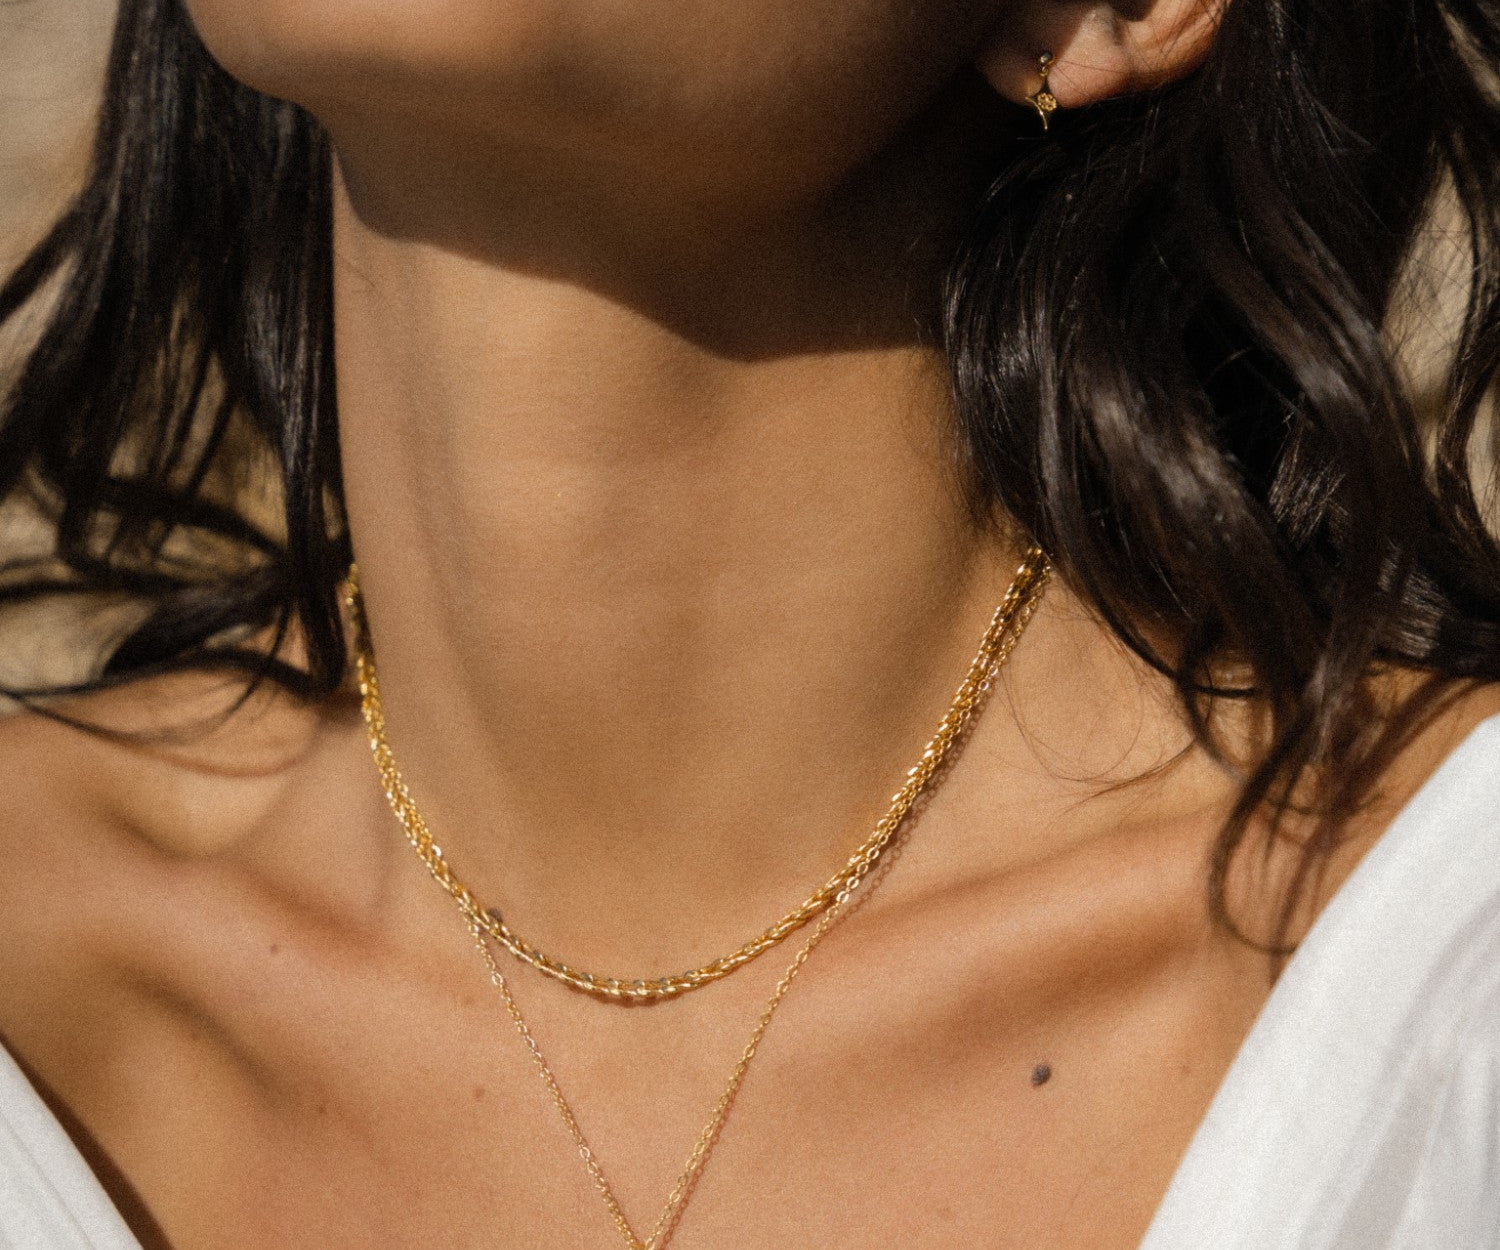 Ava Pearl Pendant Necklace | Sustainable Jewellery by Ottoman Hands